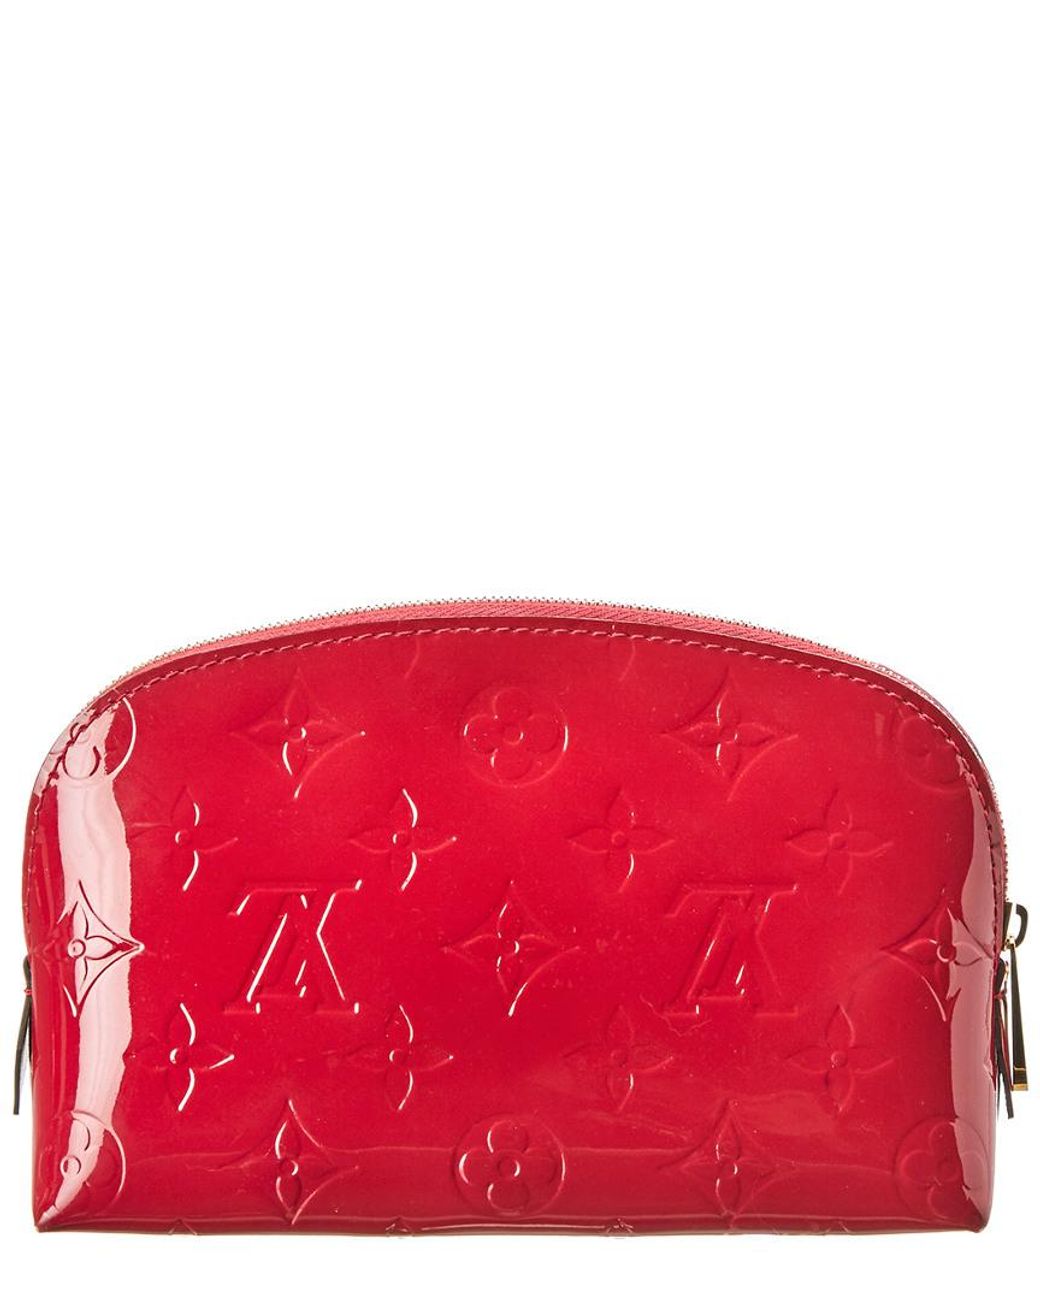 LOUIS VUITTON #39080 Red Monogram Vernis Leather Cosmetic Bag